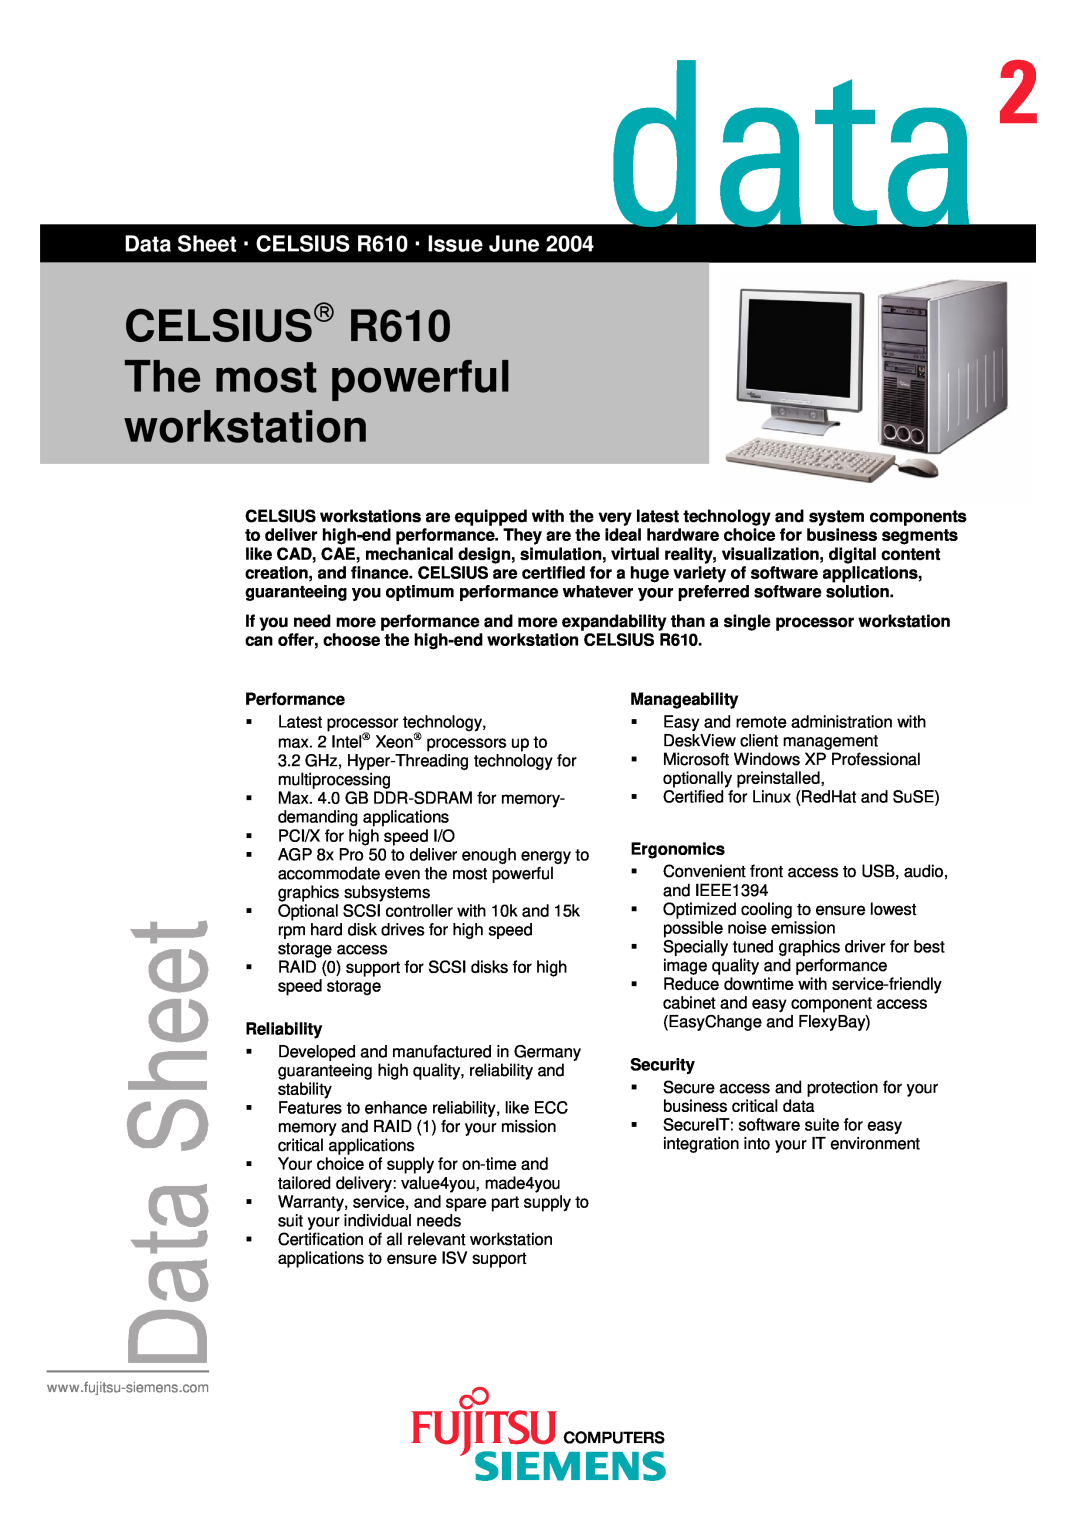 Fujitsu Siemens Computers warranty CELSIUS R610 The most powerful workstation, Data Sheet ‚ CELSIUS R610 ‚ Issue June 